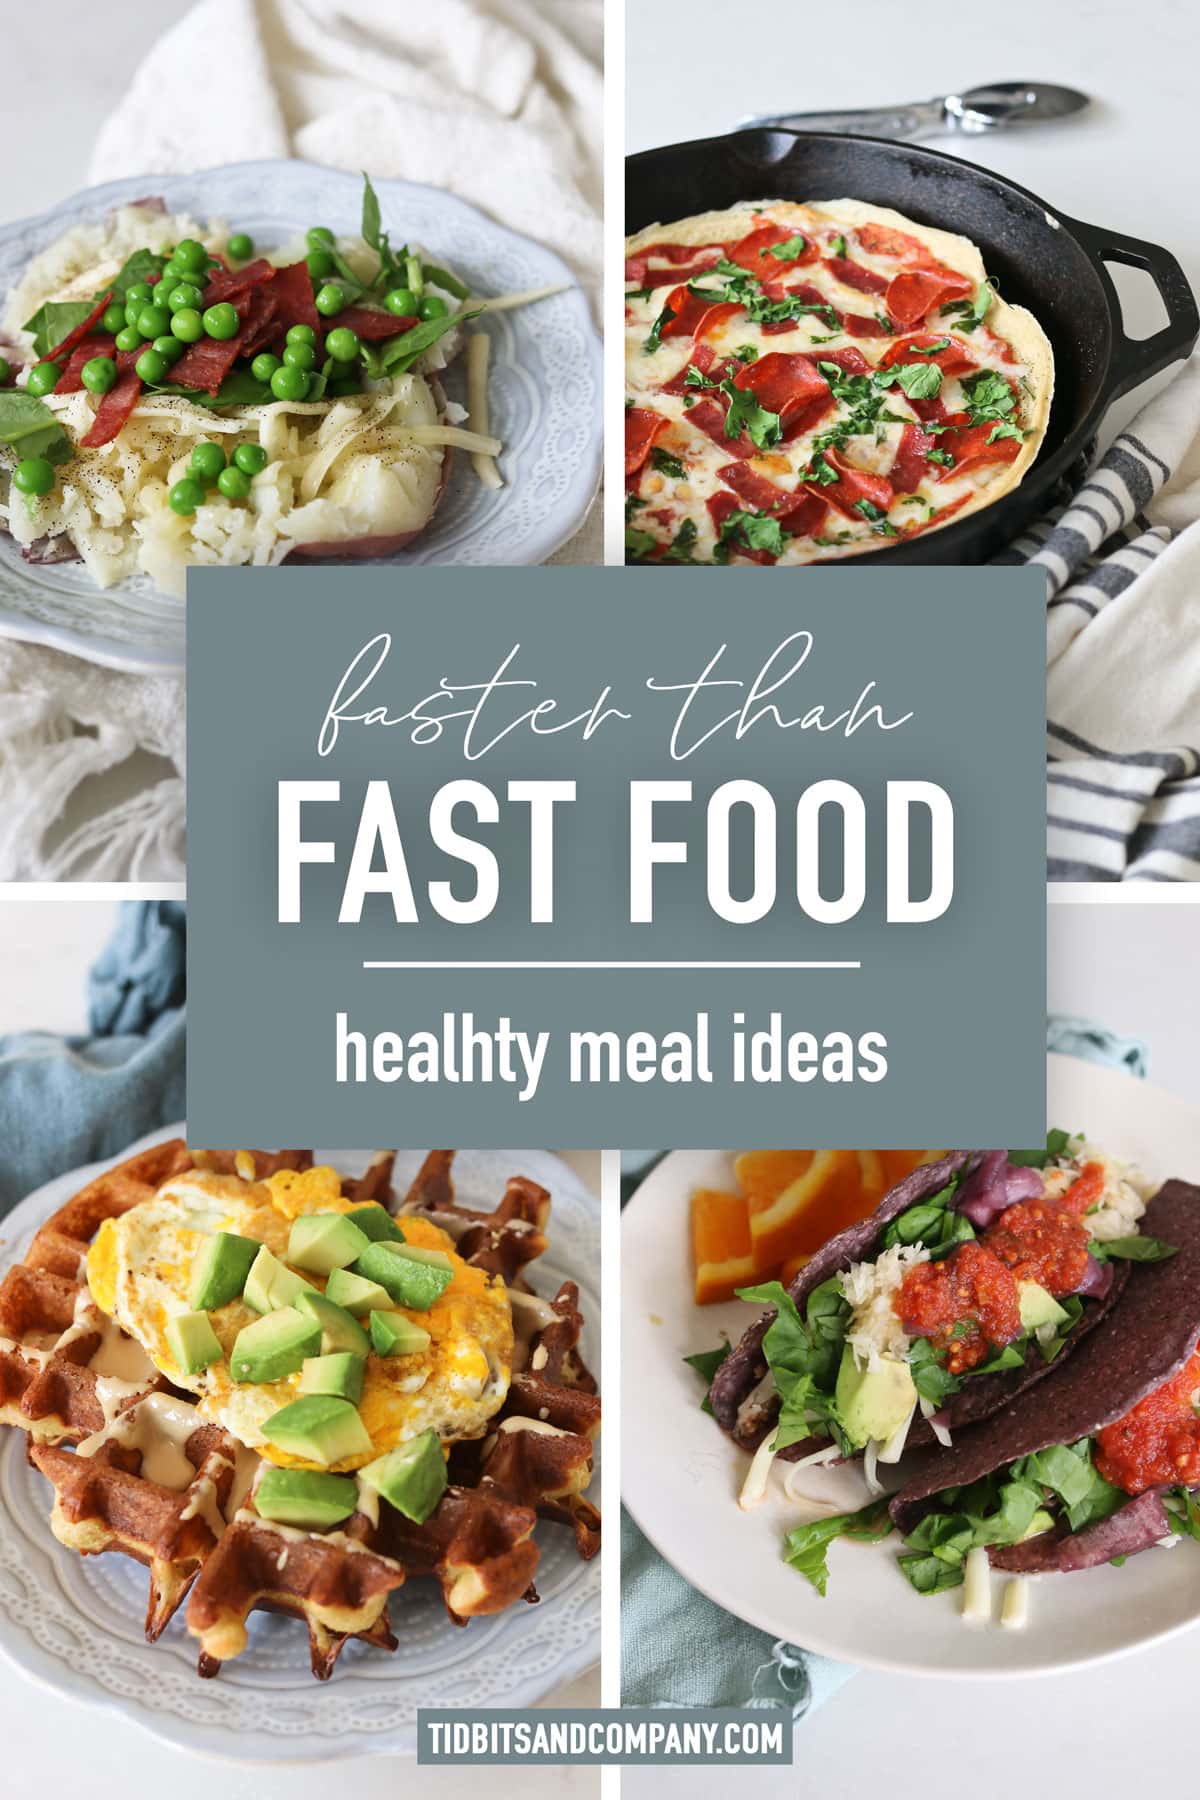 Collage of healthy, fast meals with "Faster than Fast Food" text